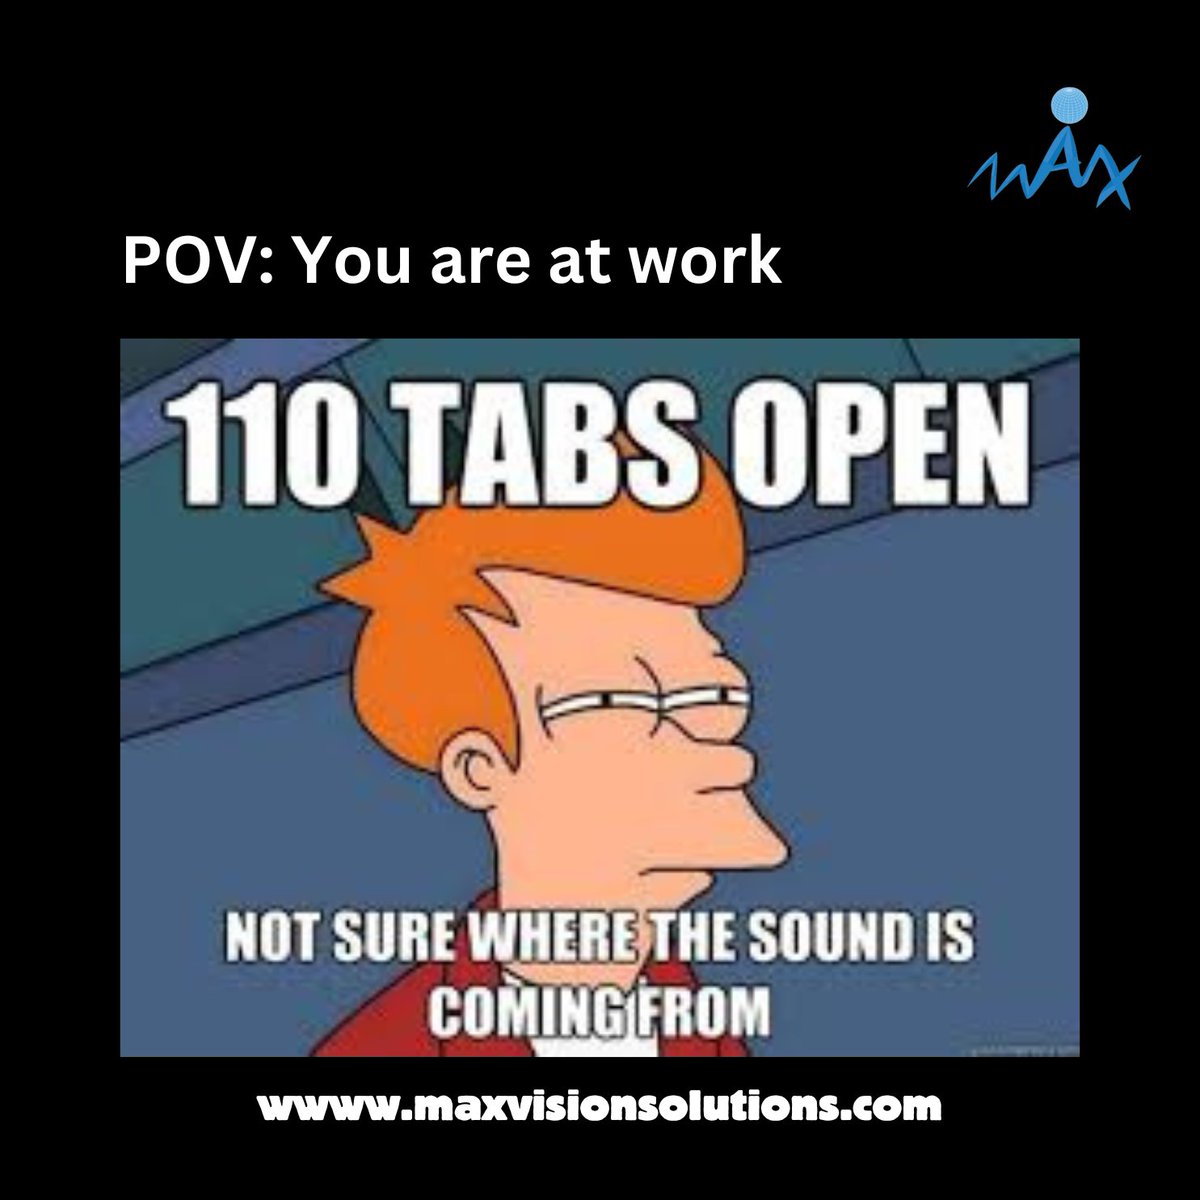 When you have 110 tabs open and can't find the source of that mysterious sound...😵🎼 #ITProblems #TechLife #MultitaskingMishaps #110TabsAndCounting #TabOverloadStruggles #tabstruggle #browserchaos #taboverload #cantfindthesource #techproblems #computermemes #multitaskingfail